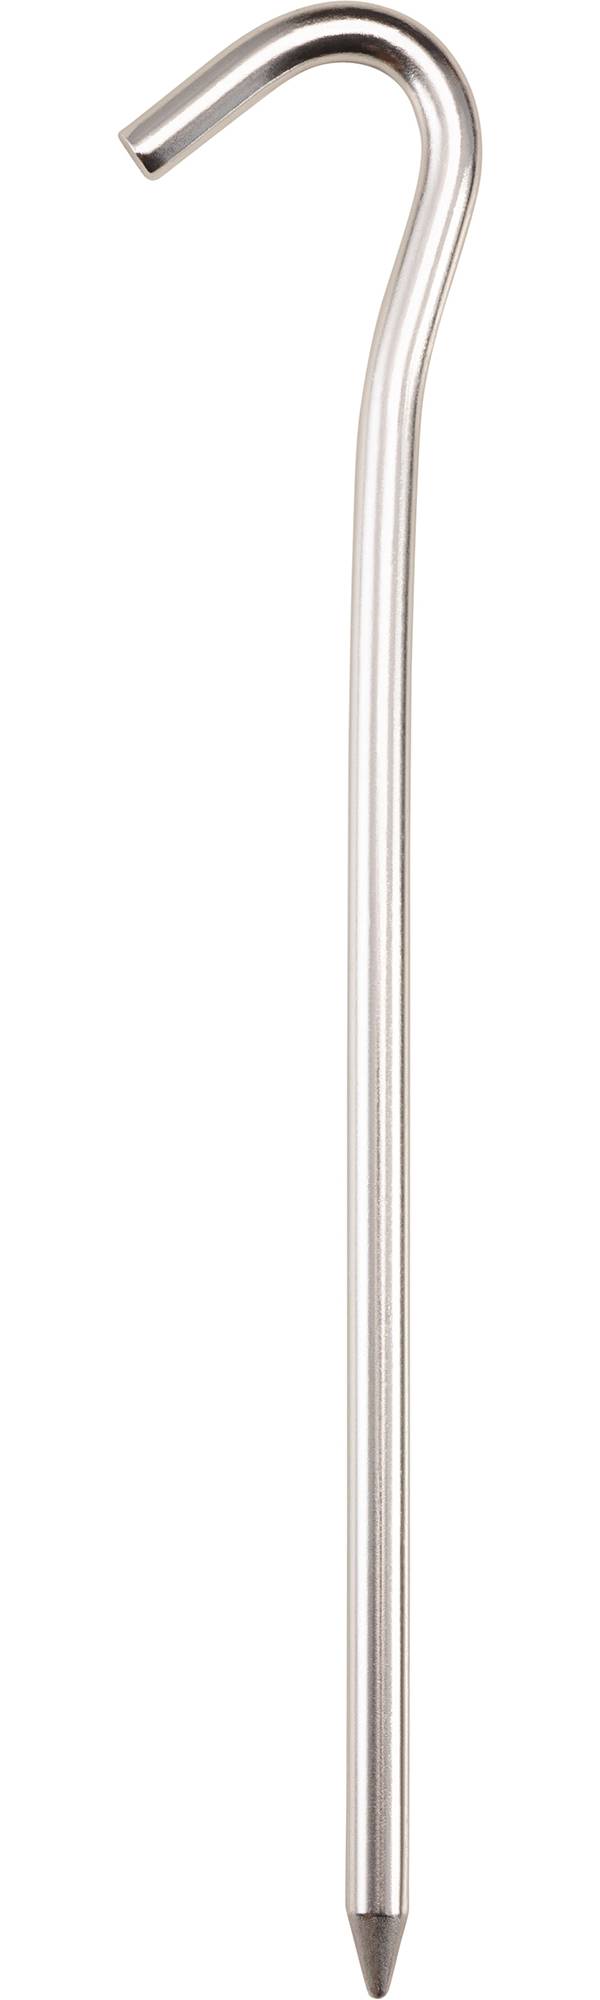 Quest 7" Aluminum Tent Stake product image